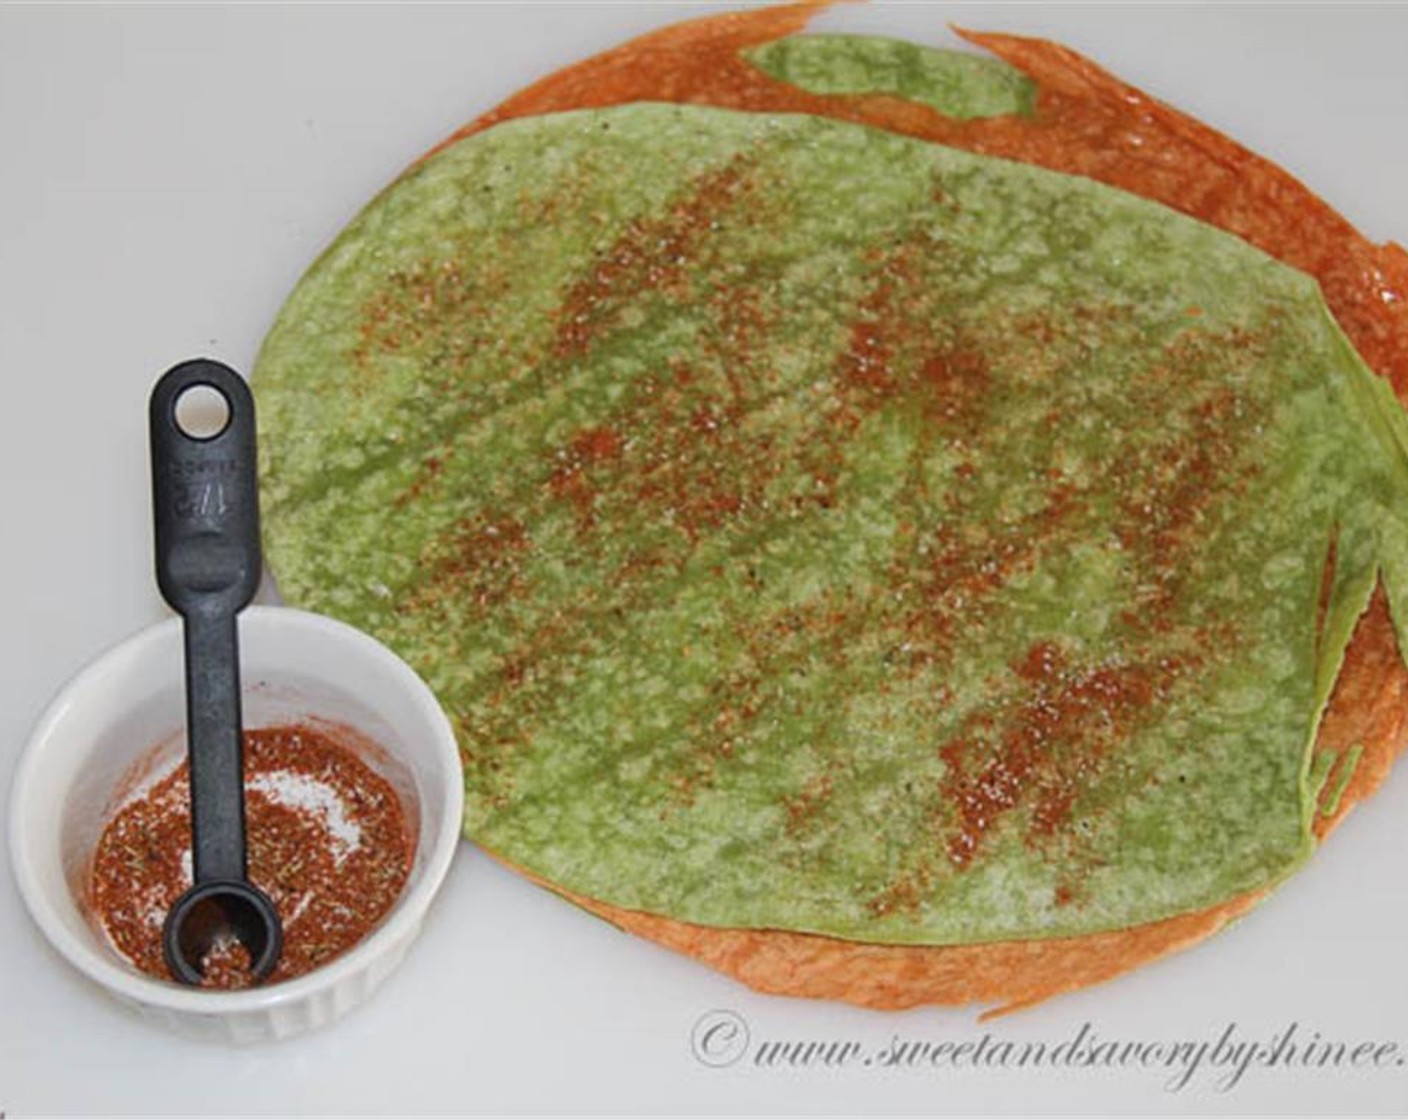 step 2 Mix Kosher Salt (1/2 tsp), Paprika (1/2 tsp), Fresh Rosemary (1/2 tsp), and Cayenne Pepper (1/2 tsp) together. Sprinkle about ½ teaspoon of spice on each wrap and spread it evenly. Again stack them on each other.